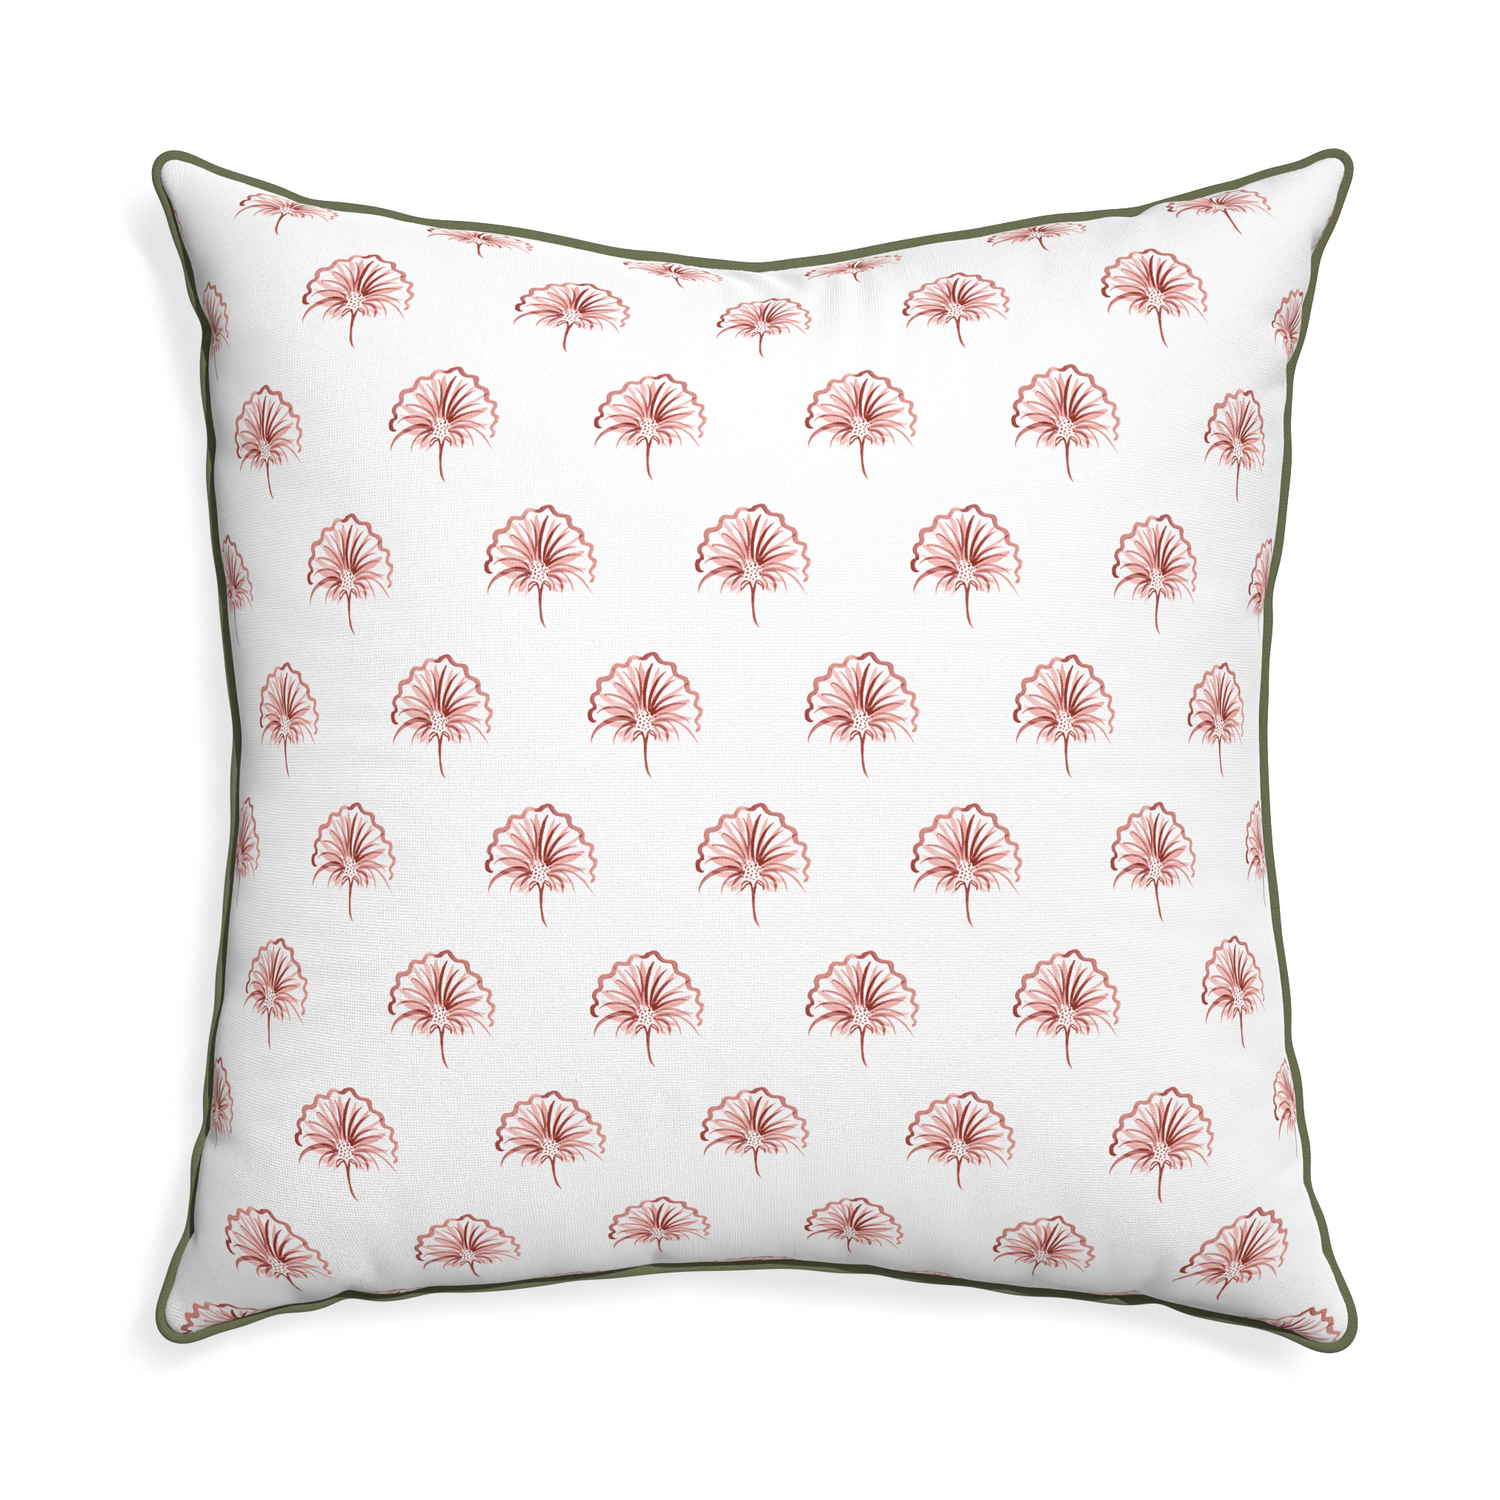 Euro-sham penelope rose custom floral pinkpillow with f piping on white background